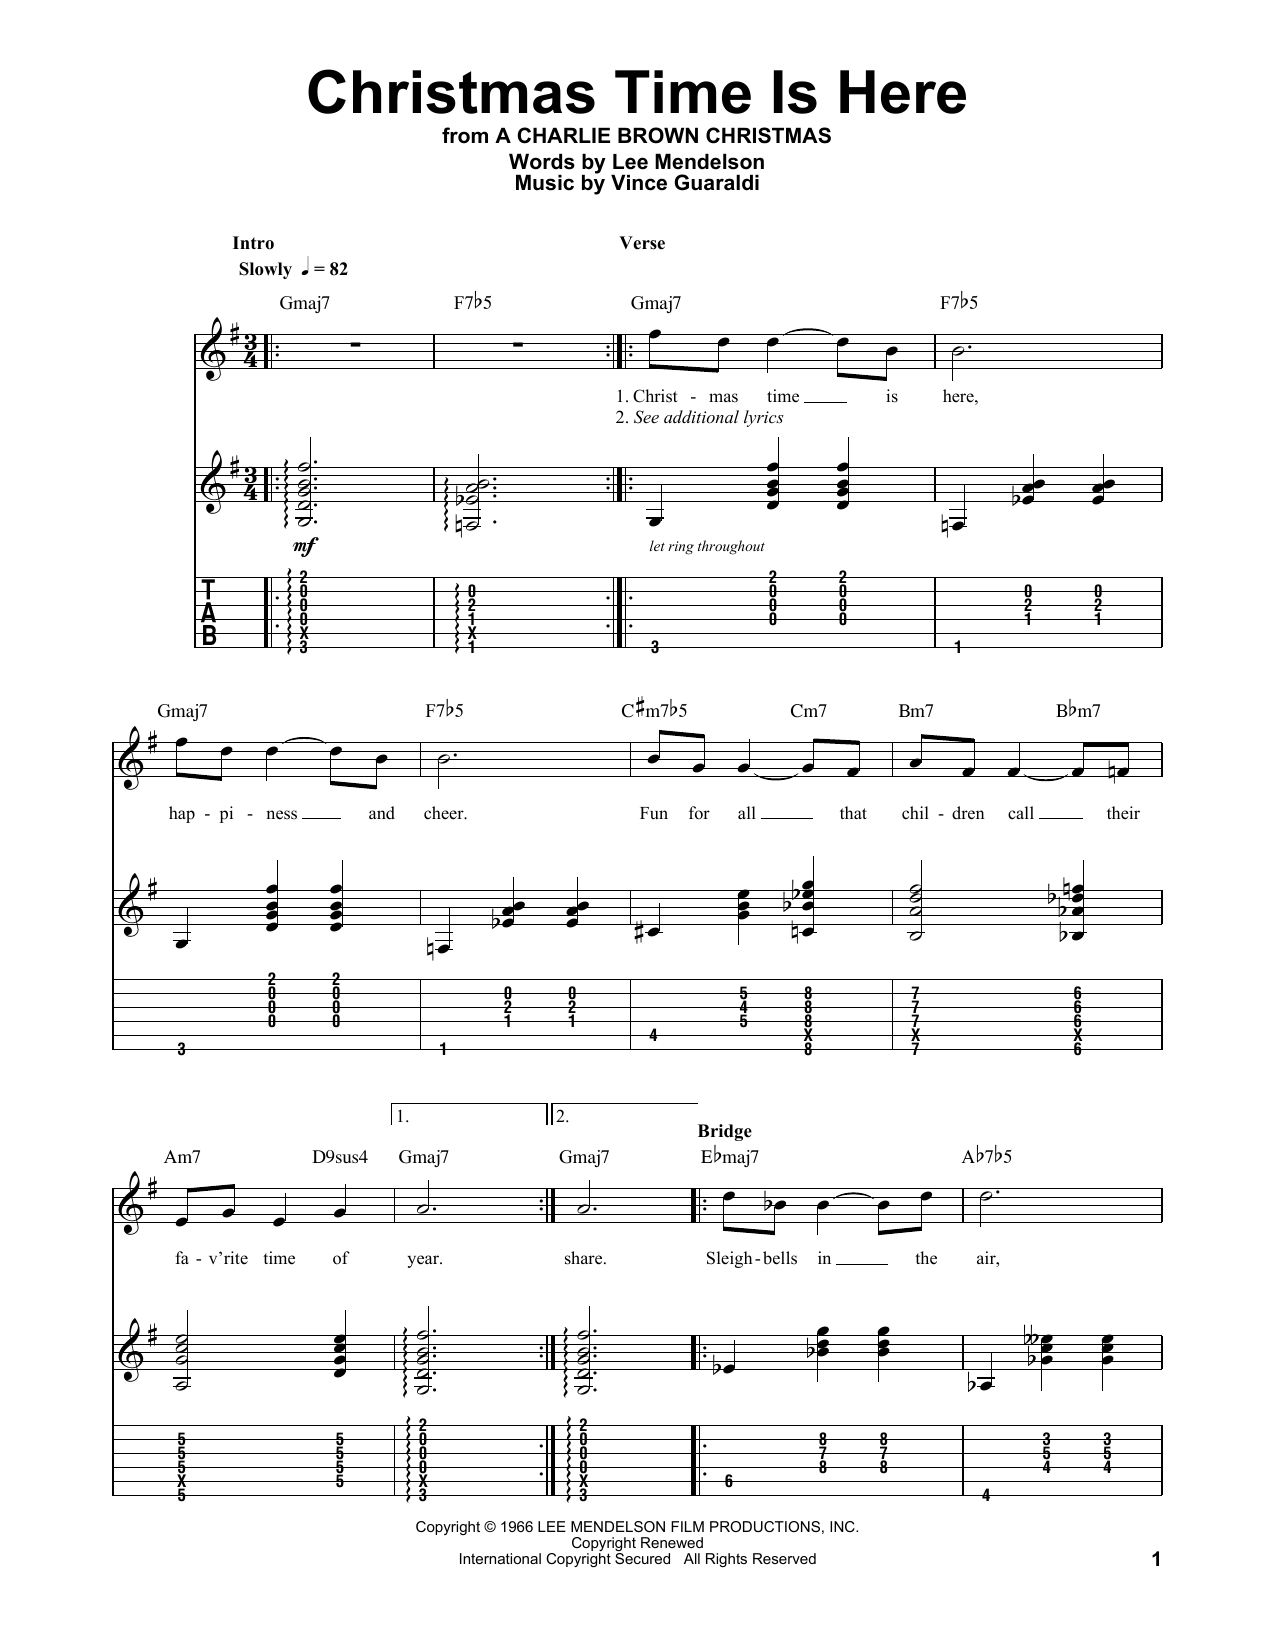 Download Vince Guaraldi Christmas Time Is Here Sheet Music